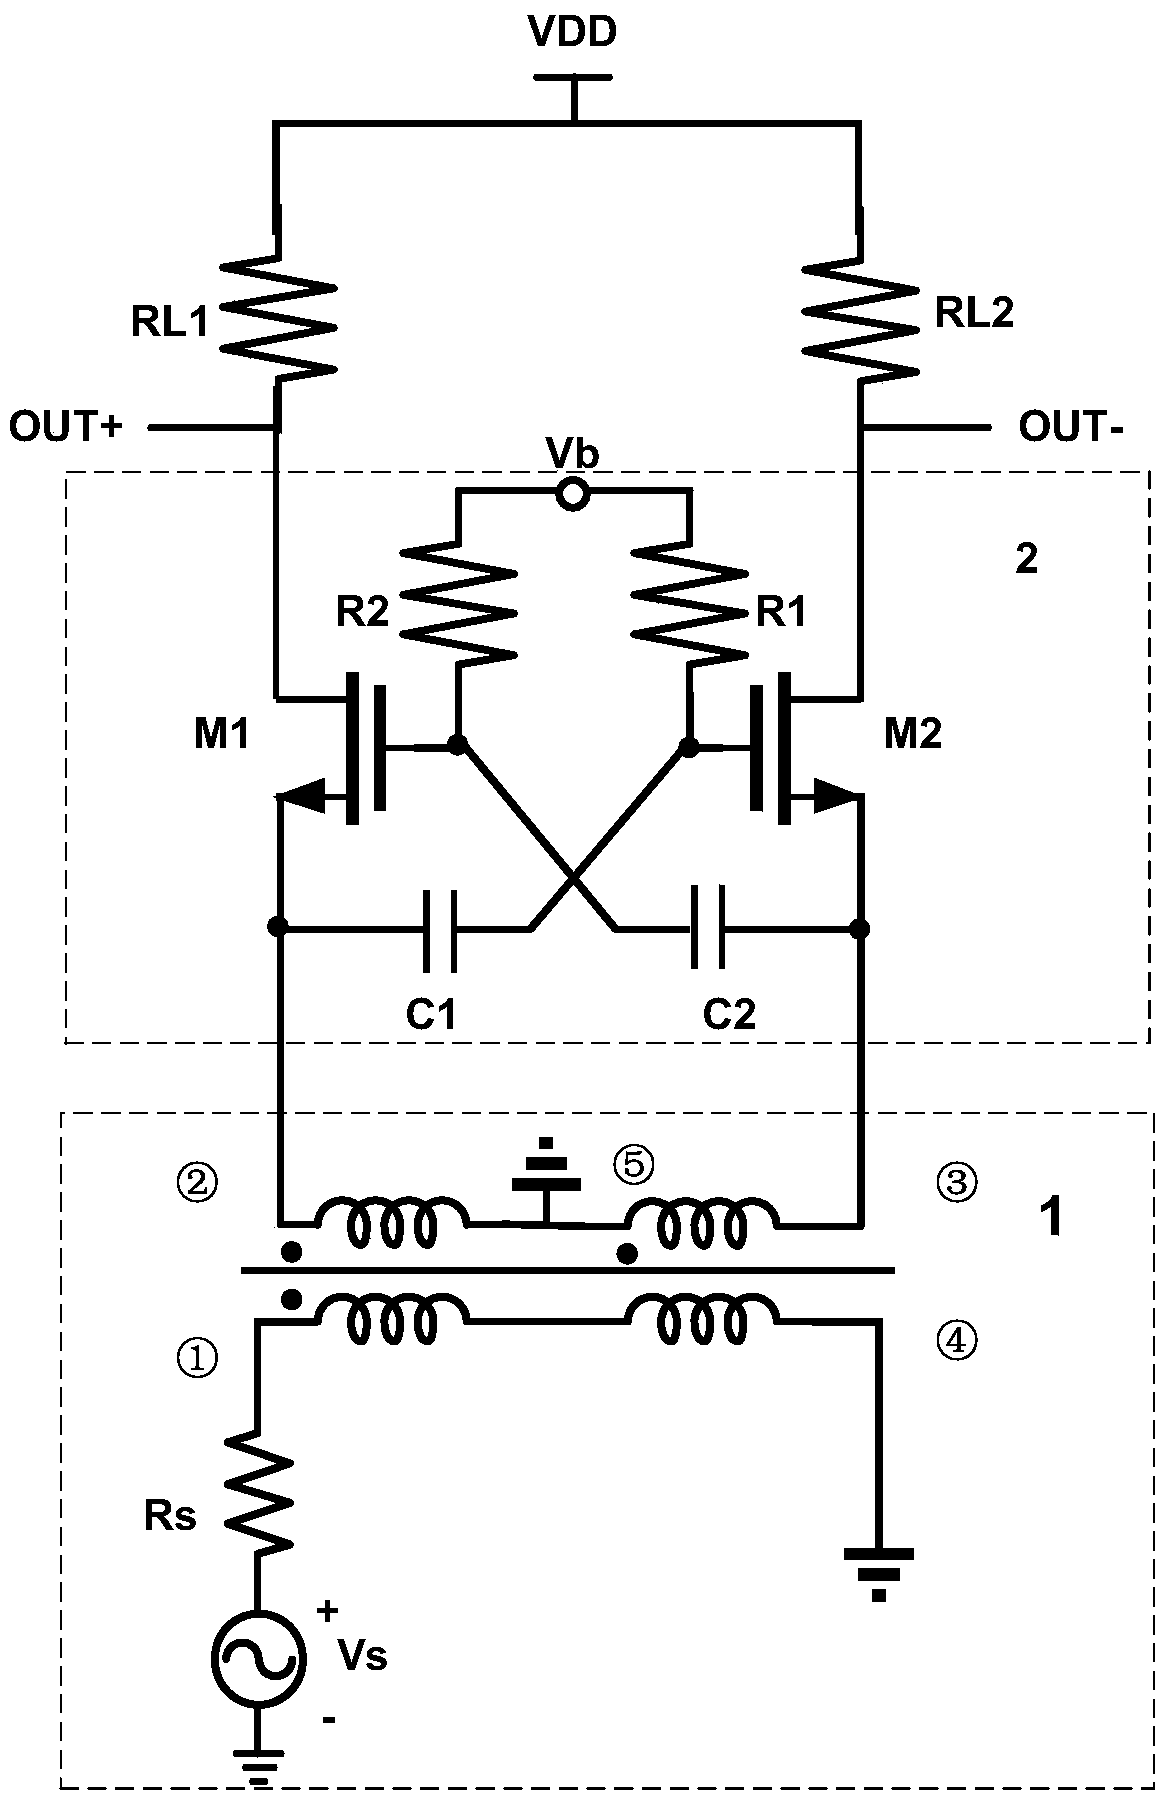 A Low Power Low Noise Amplifier Using Positive Feedback Technology and Active Transconductance Enhancement Technology